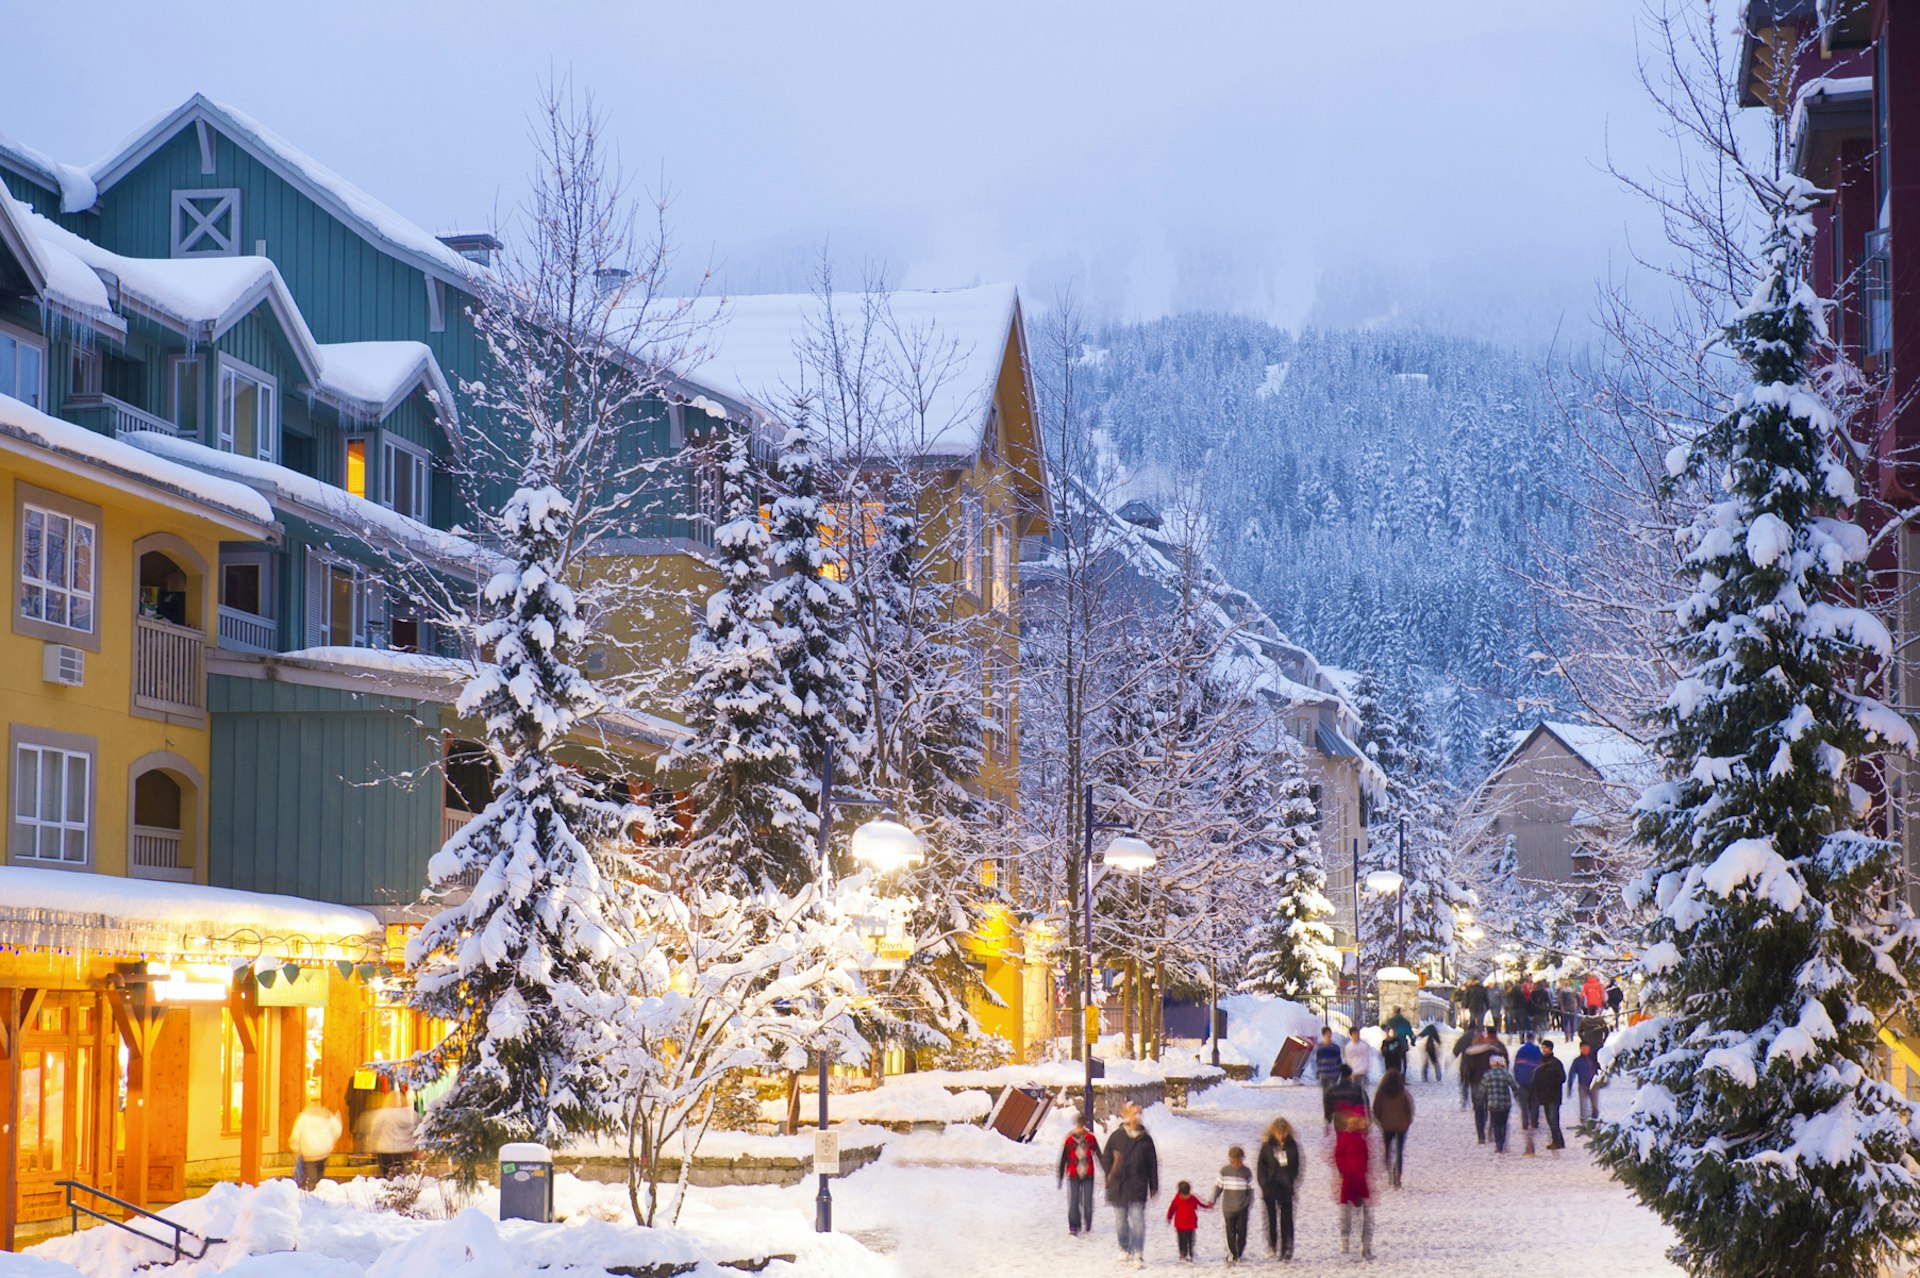 Whistler Village filled with shops, hotels, and restaurants